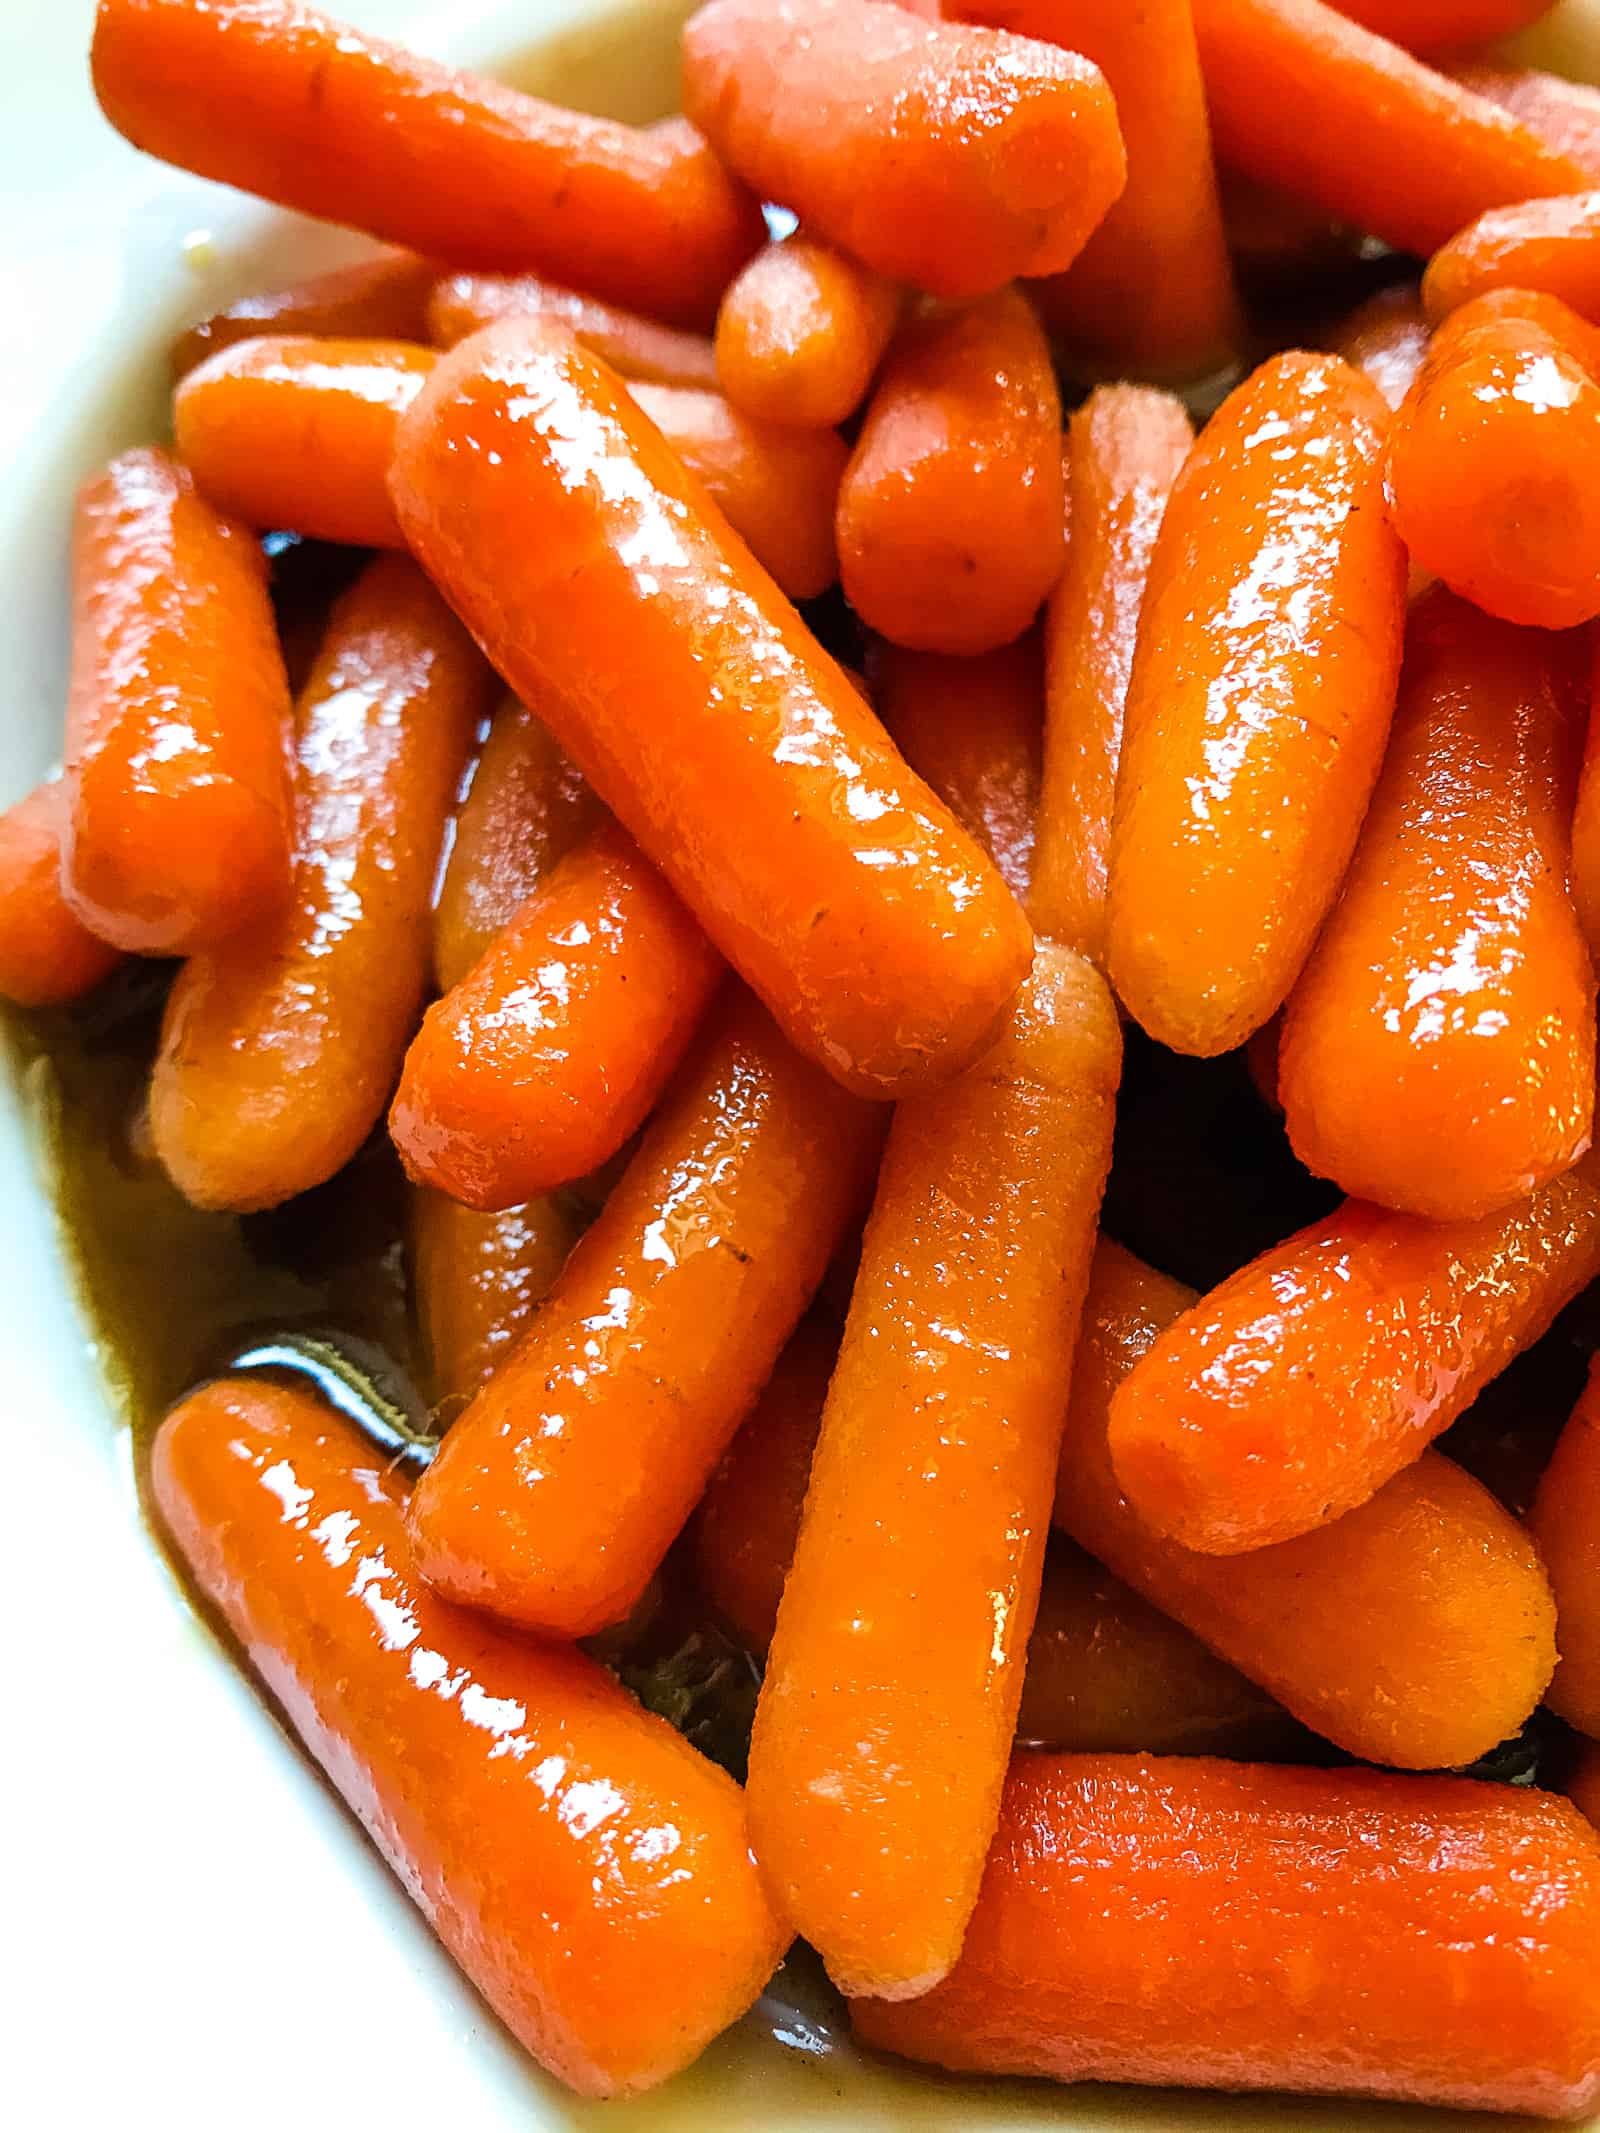 Glazed carrots with brown sugar sauce.